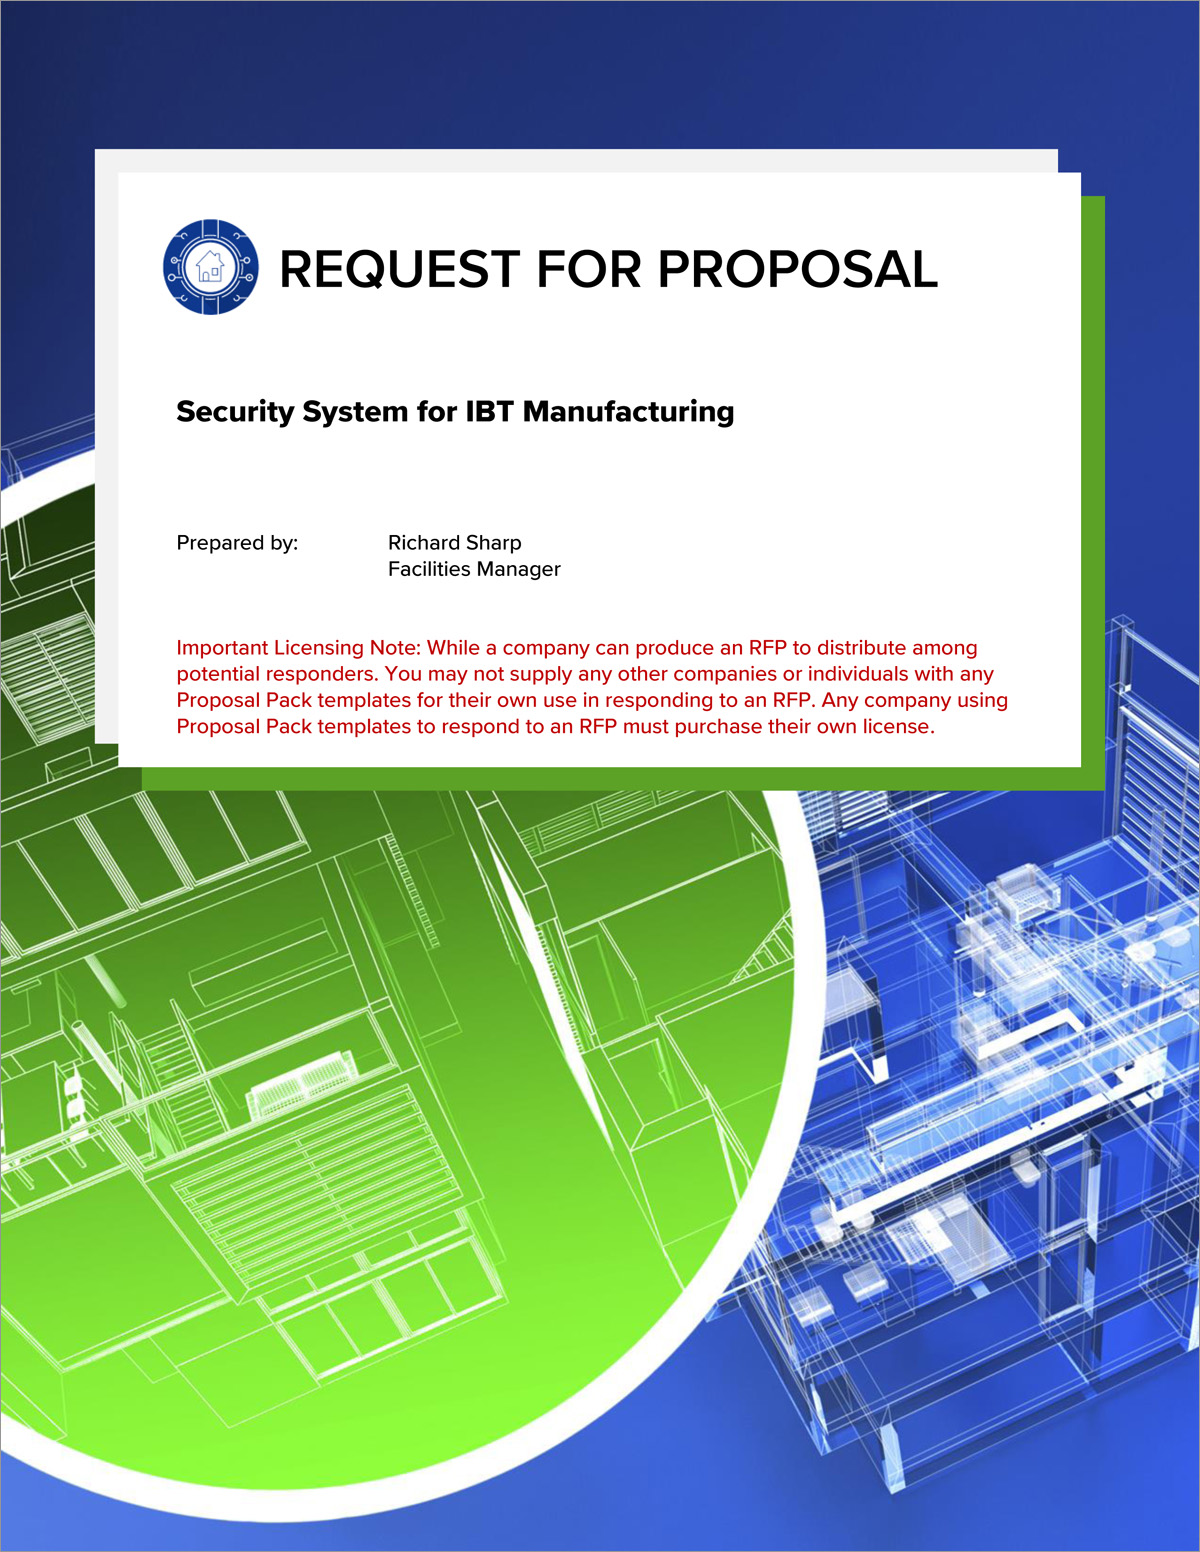 Request for Proposal (RFP) Sample 5 Steps